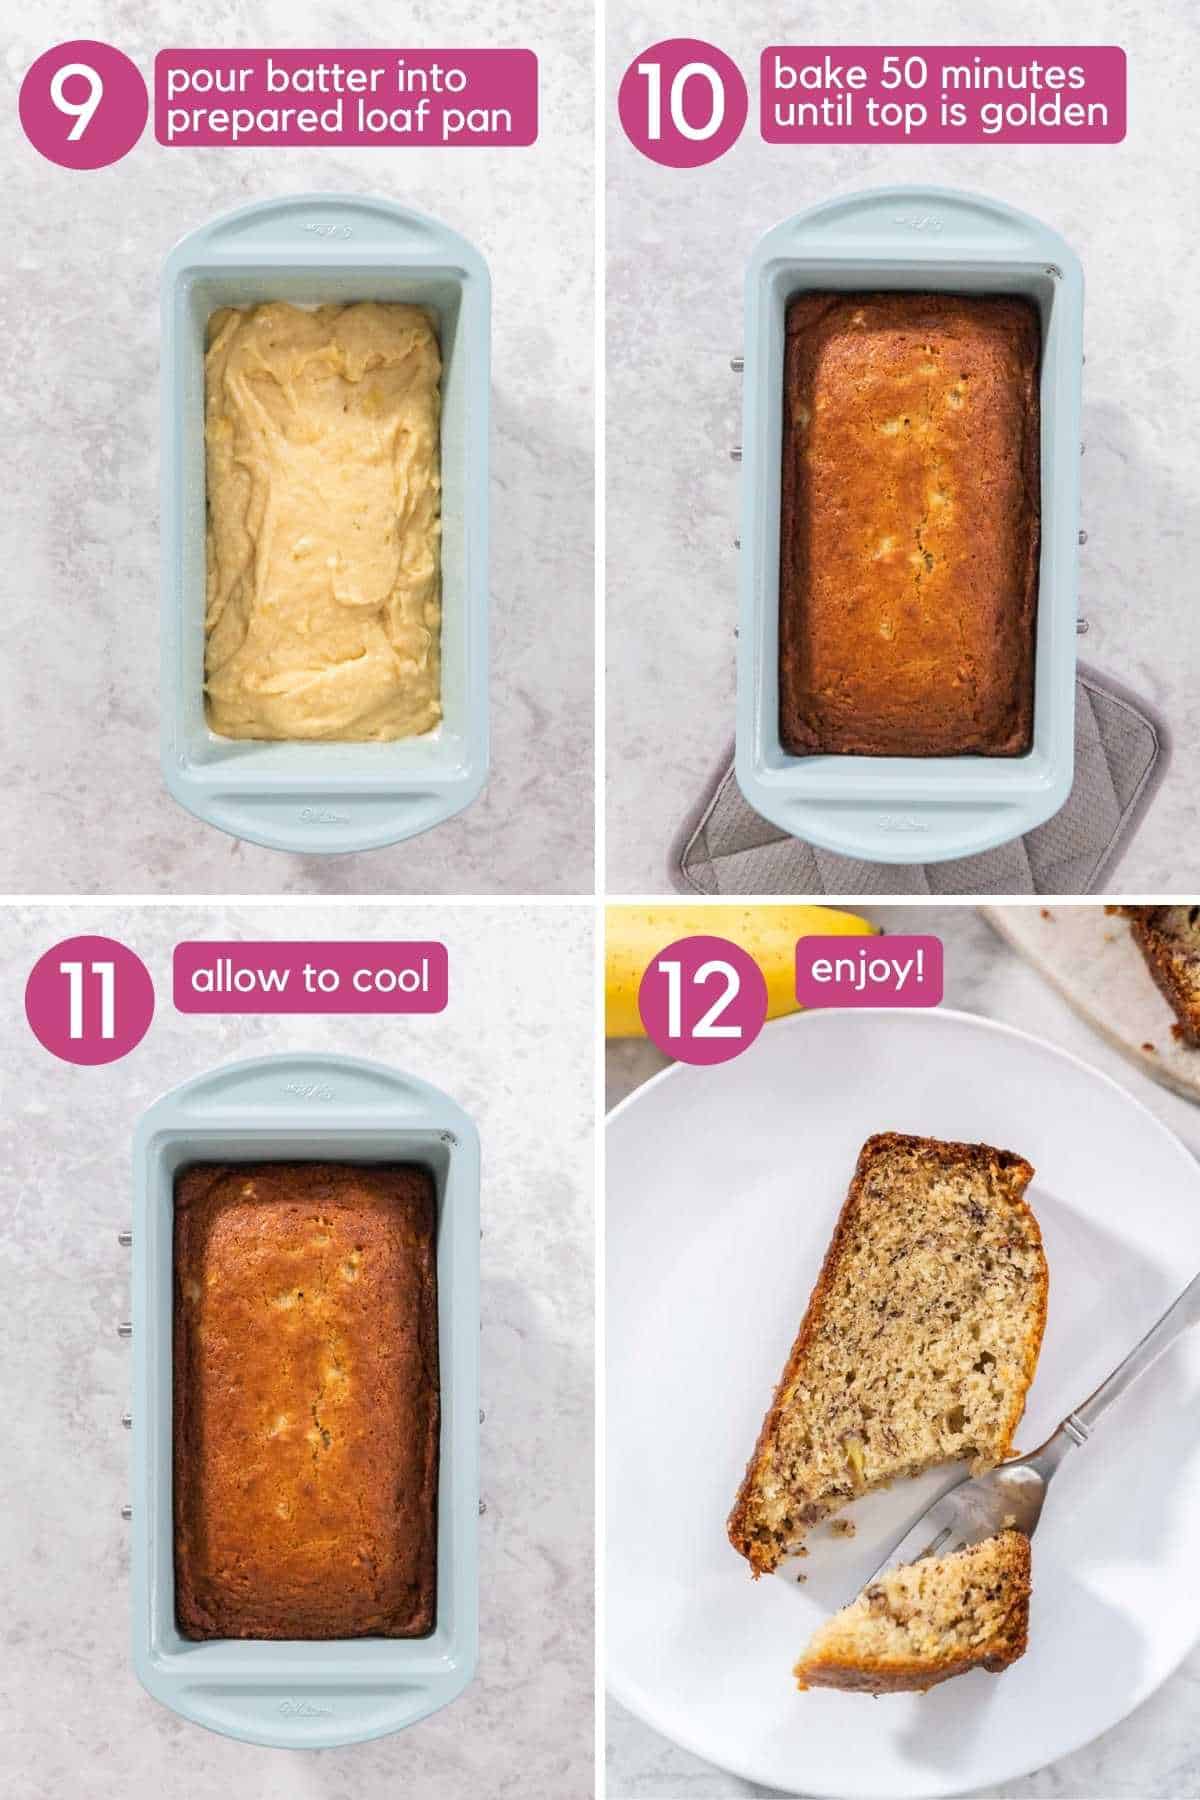 Pour into pan and bake for one bowl banana bread.